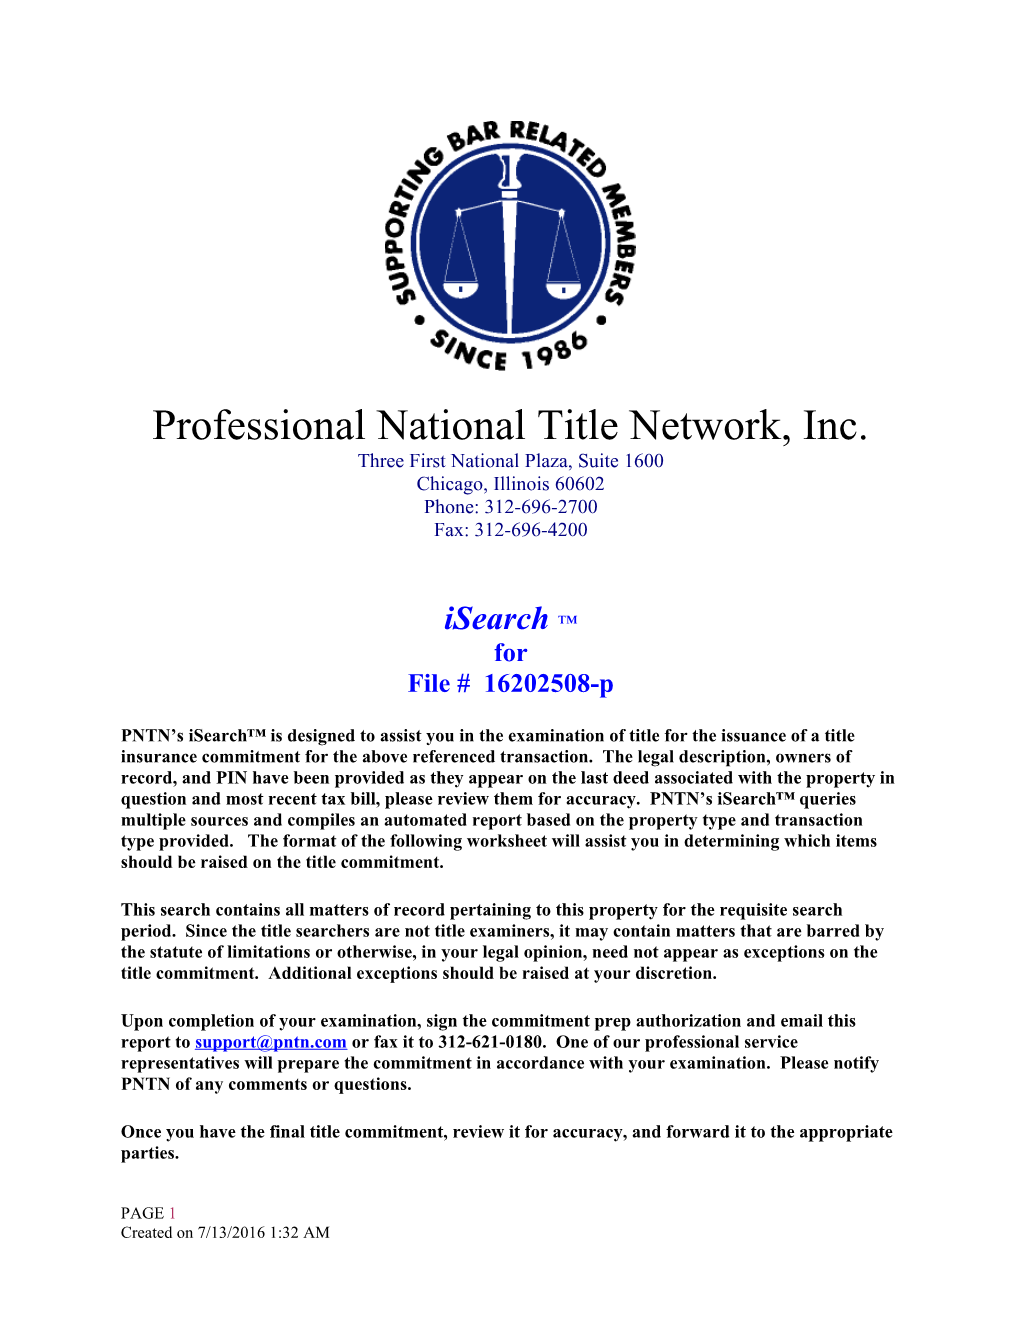 Professional National Title Network, Inc